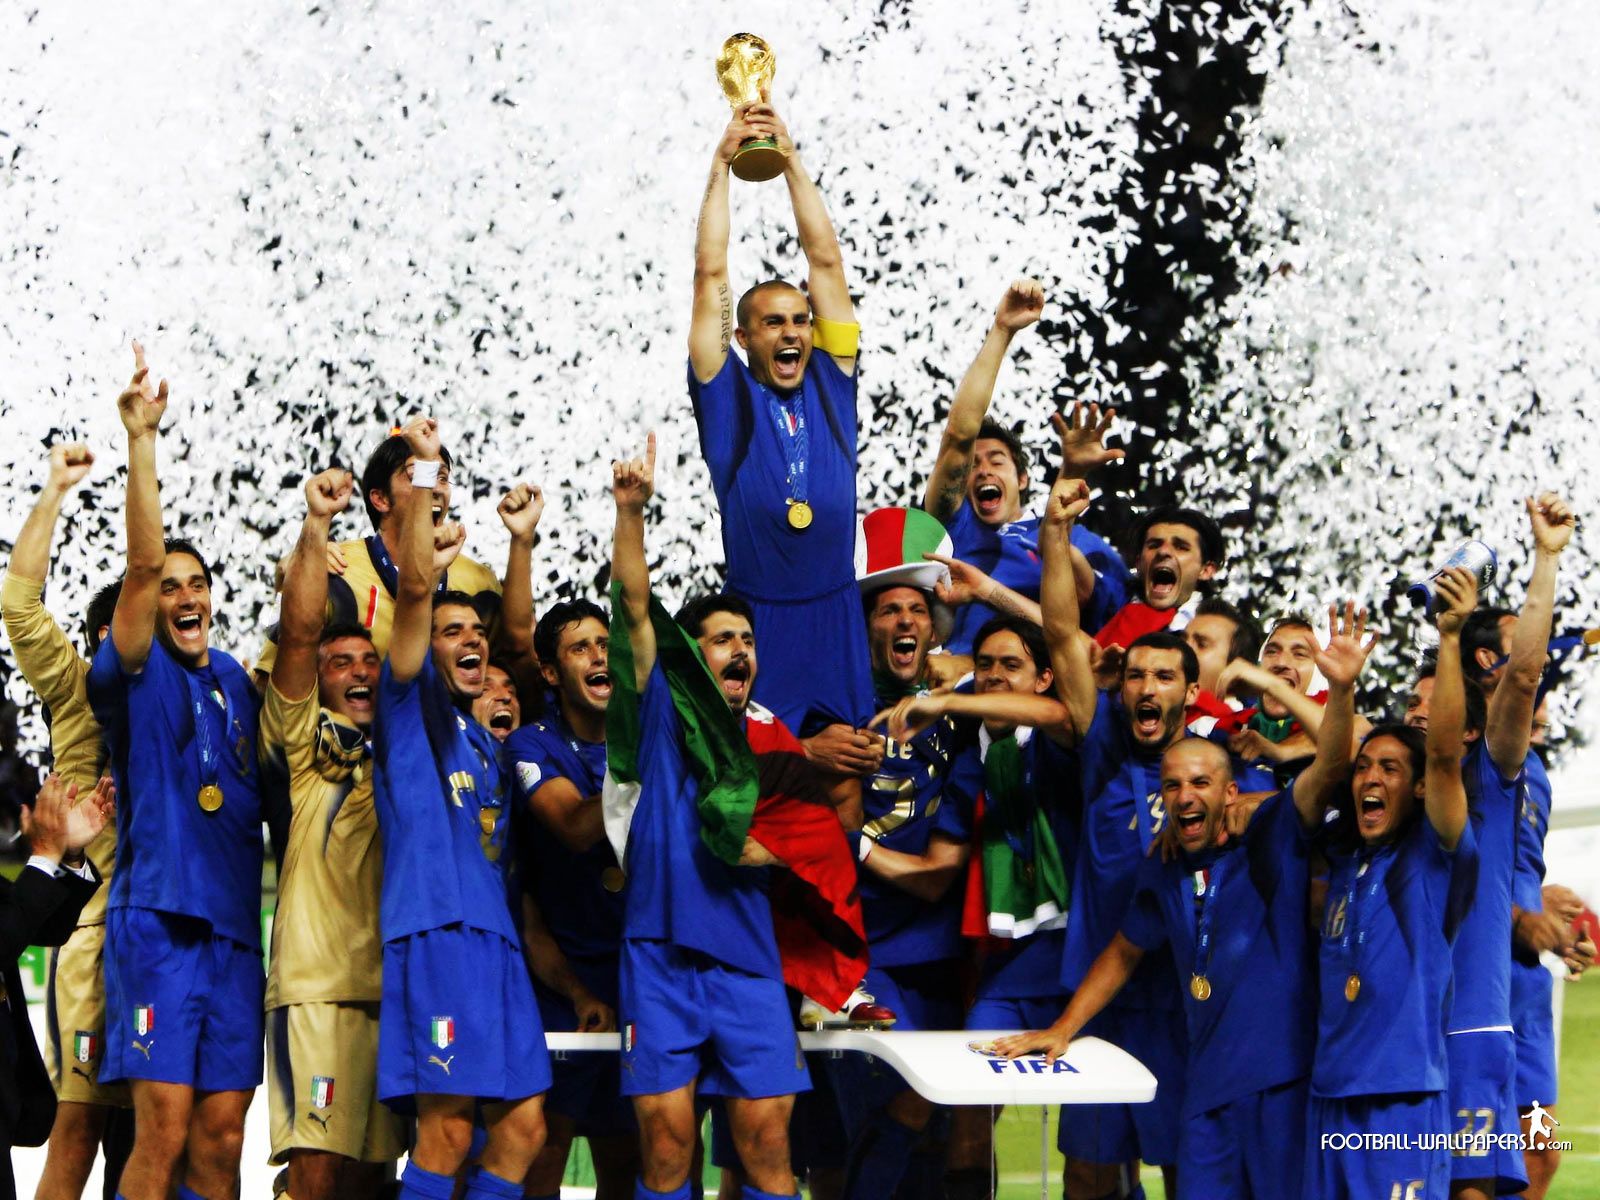 world cup italy. World cup champions, World cup, Italy world cup